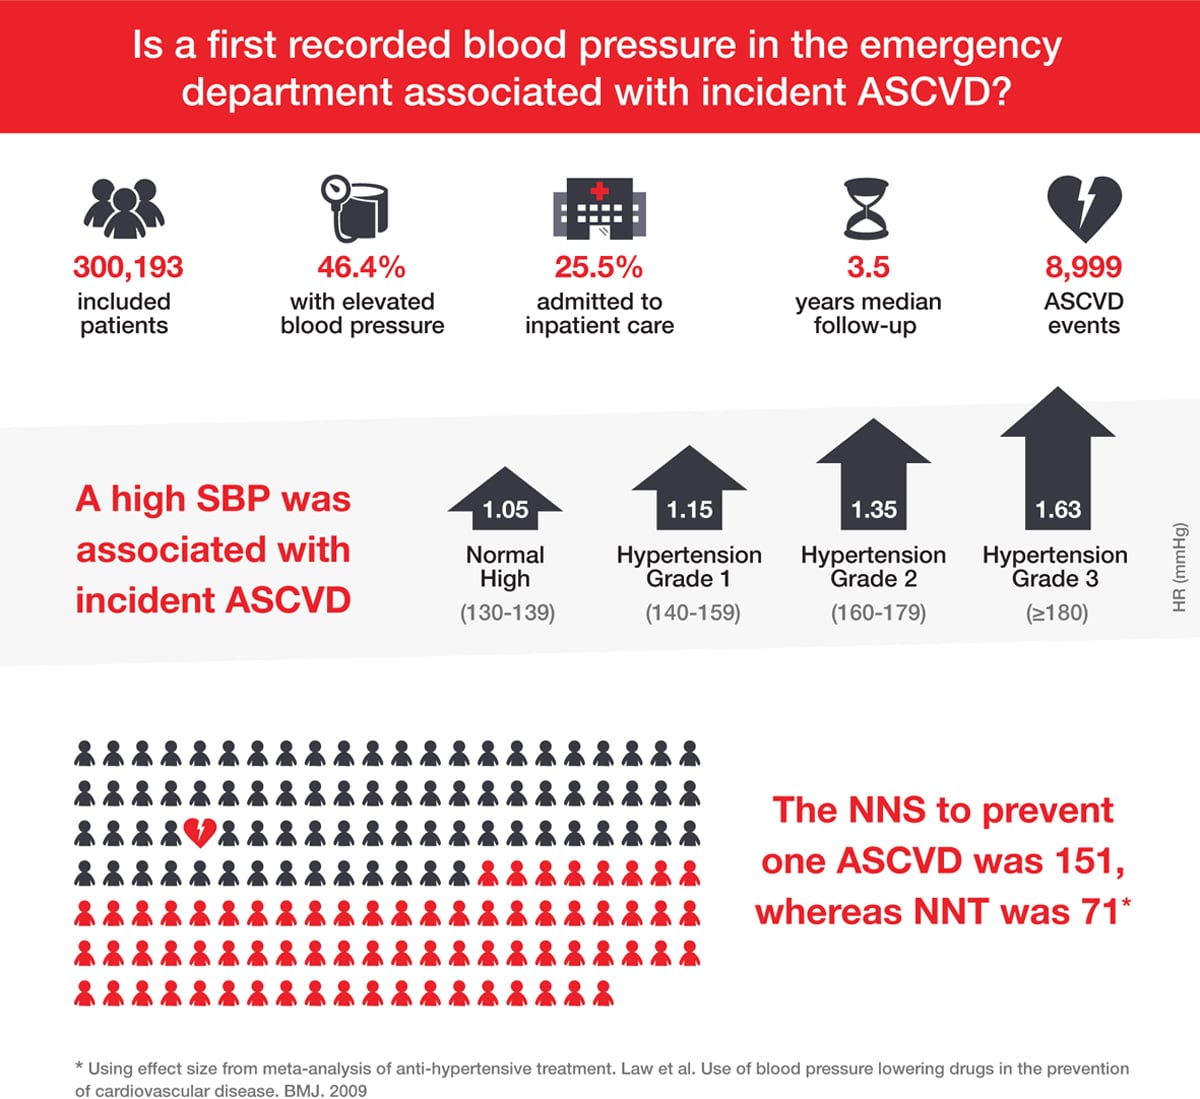 Elevated Blood Pressure in the Emergency Department